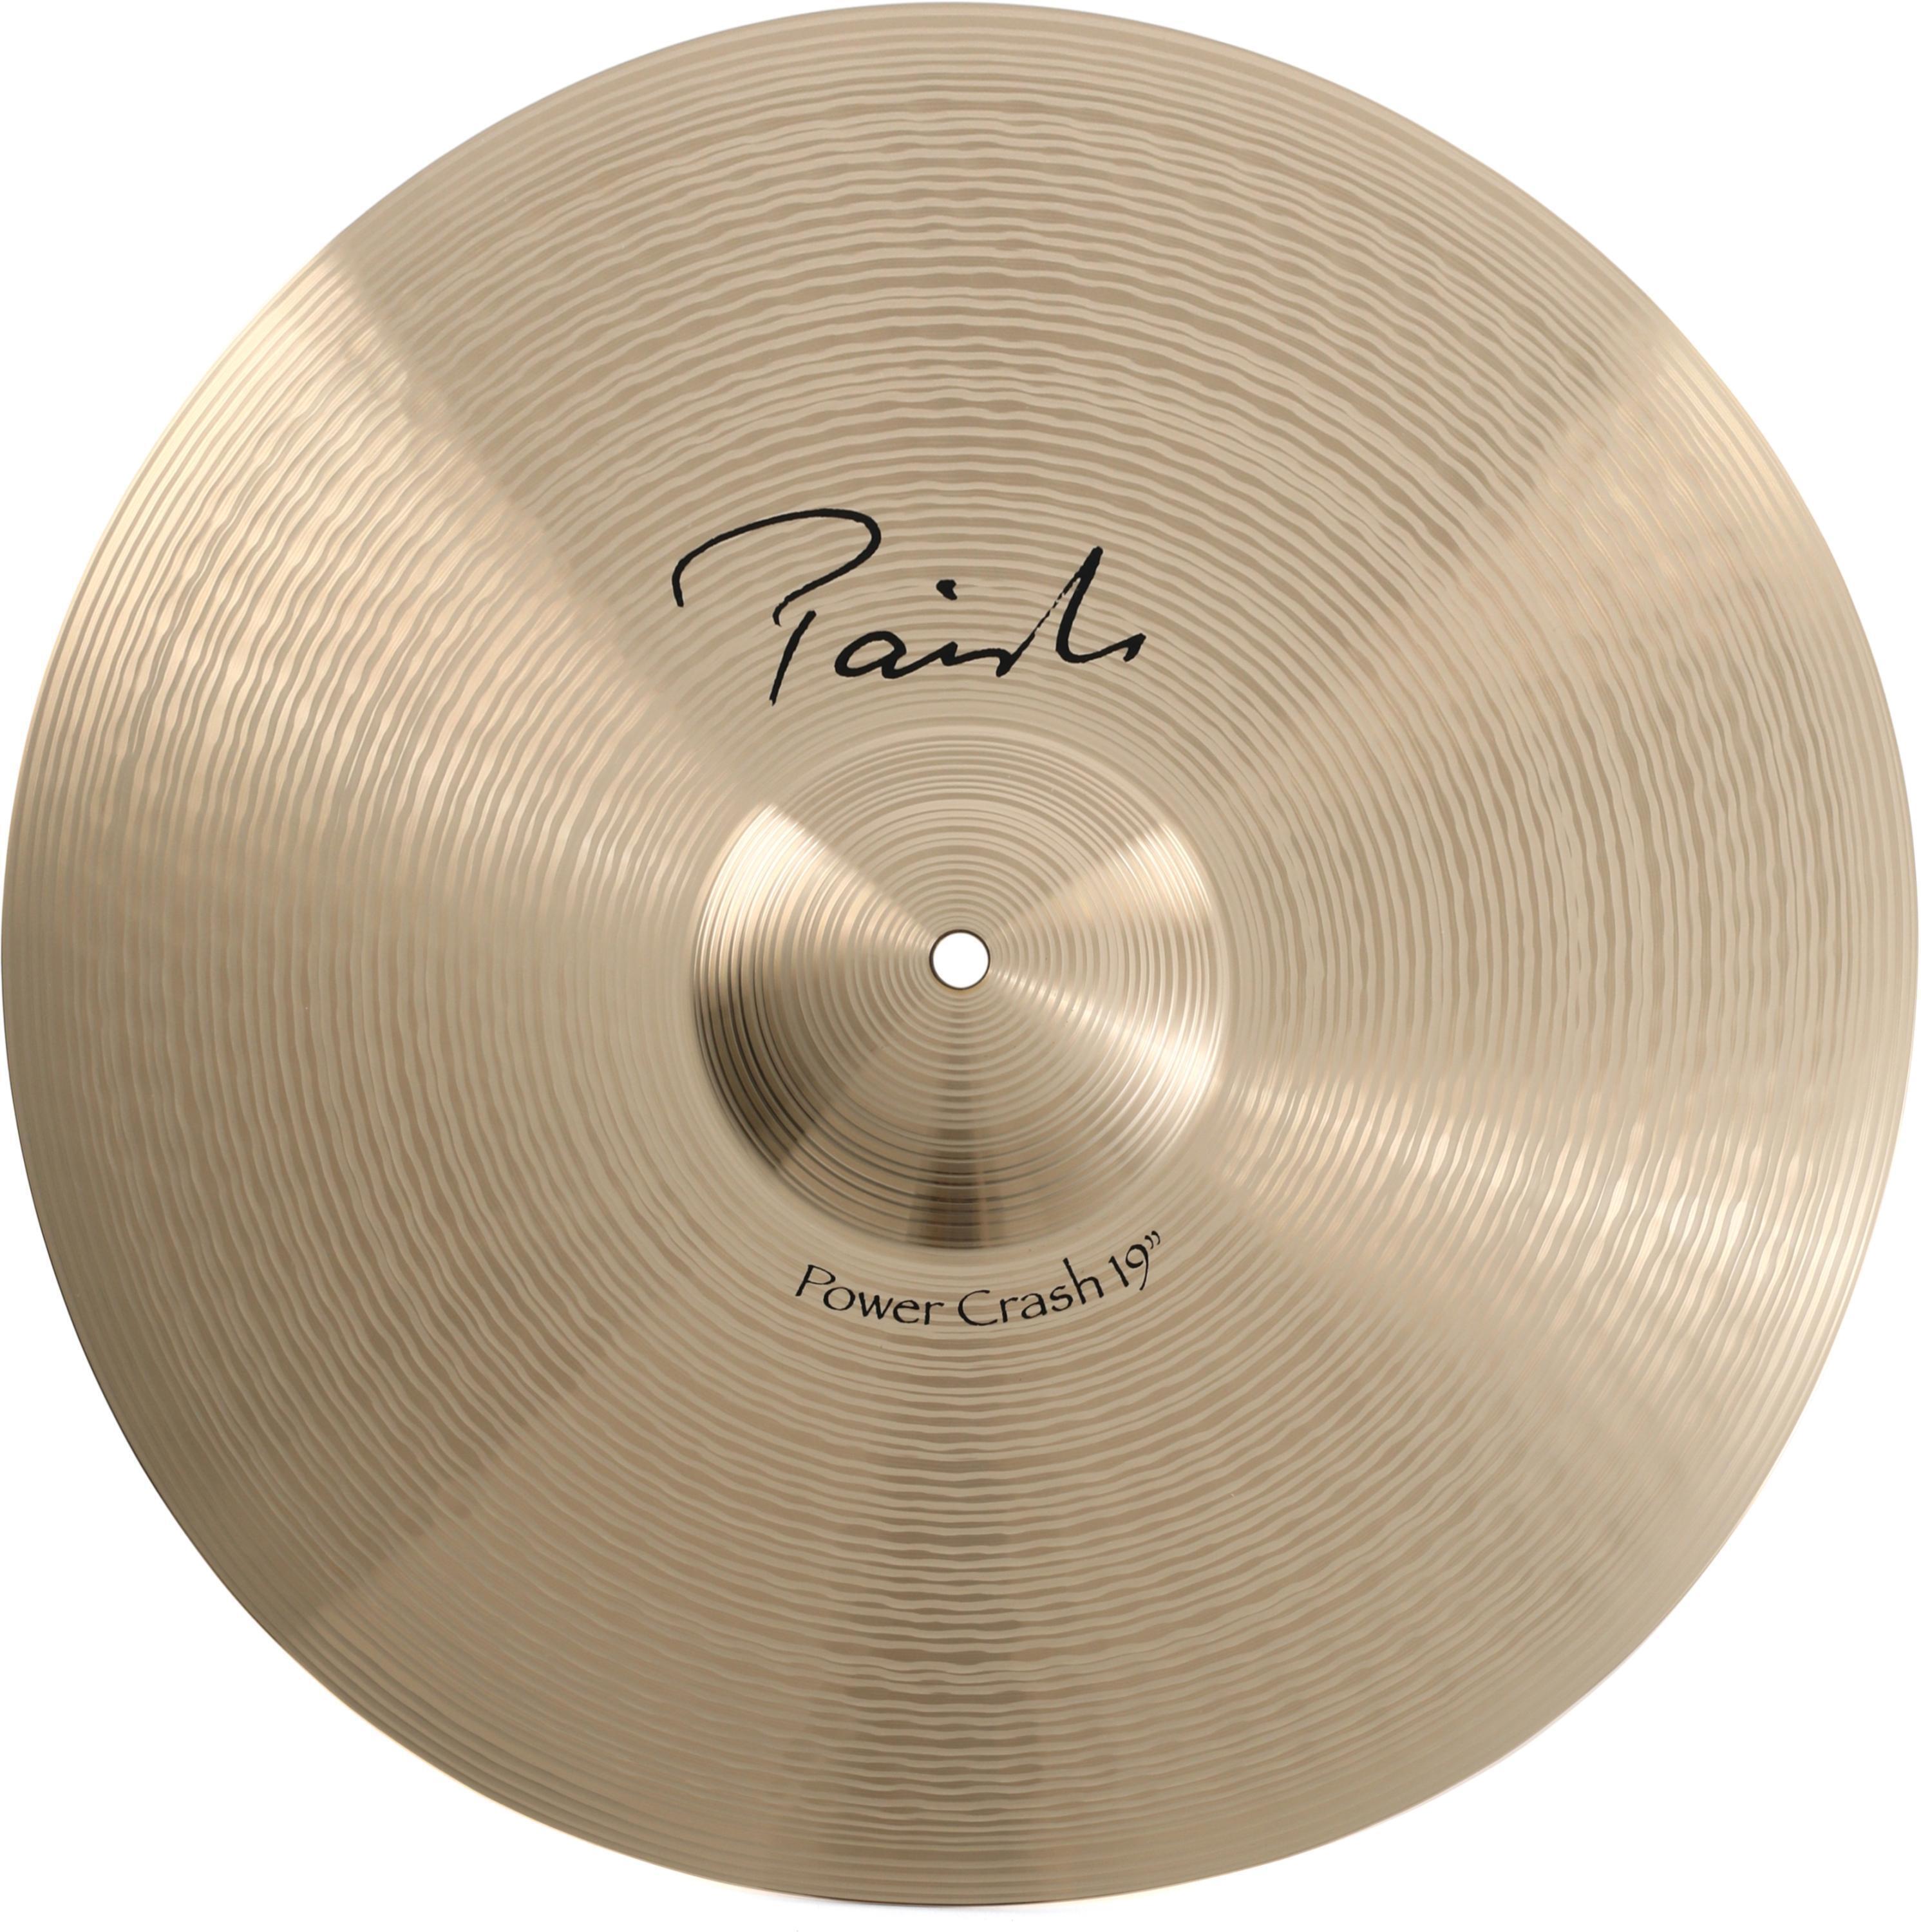 Signature Power Crash Cymbal - 19 inch - Sweetwater